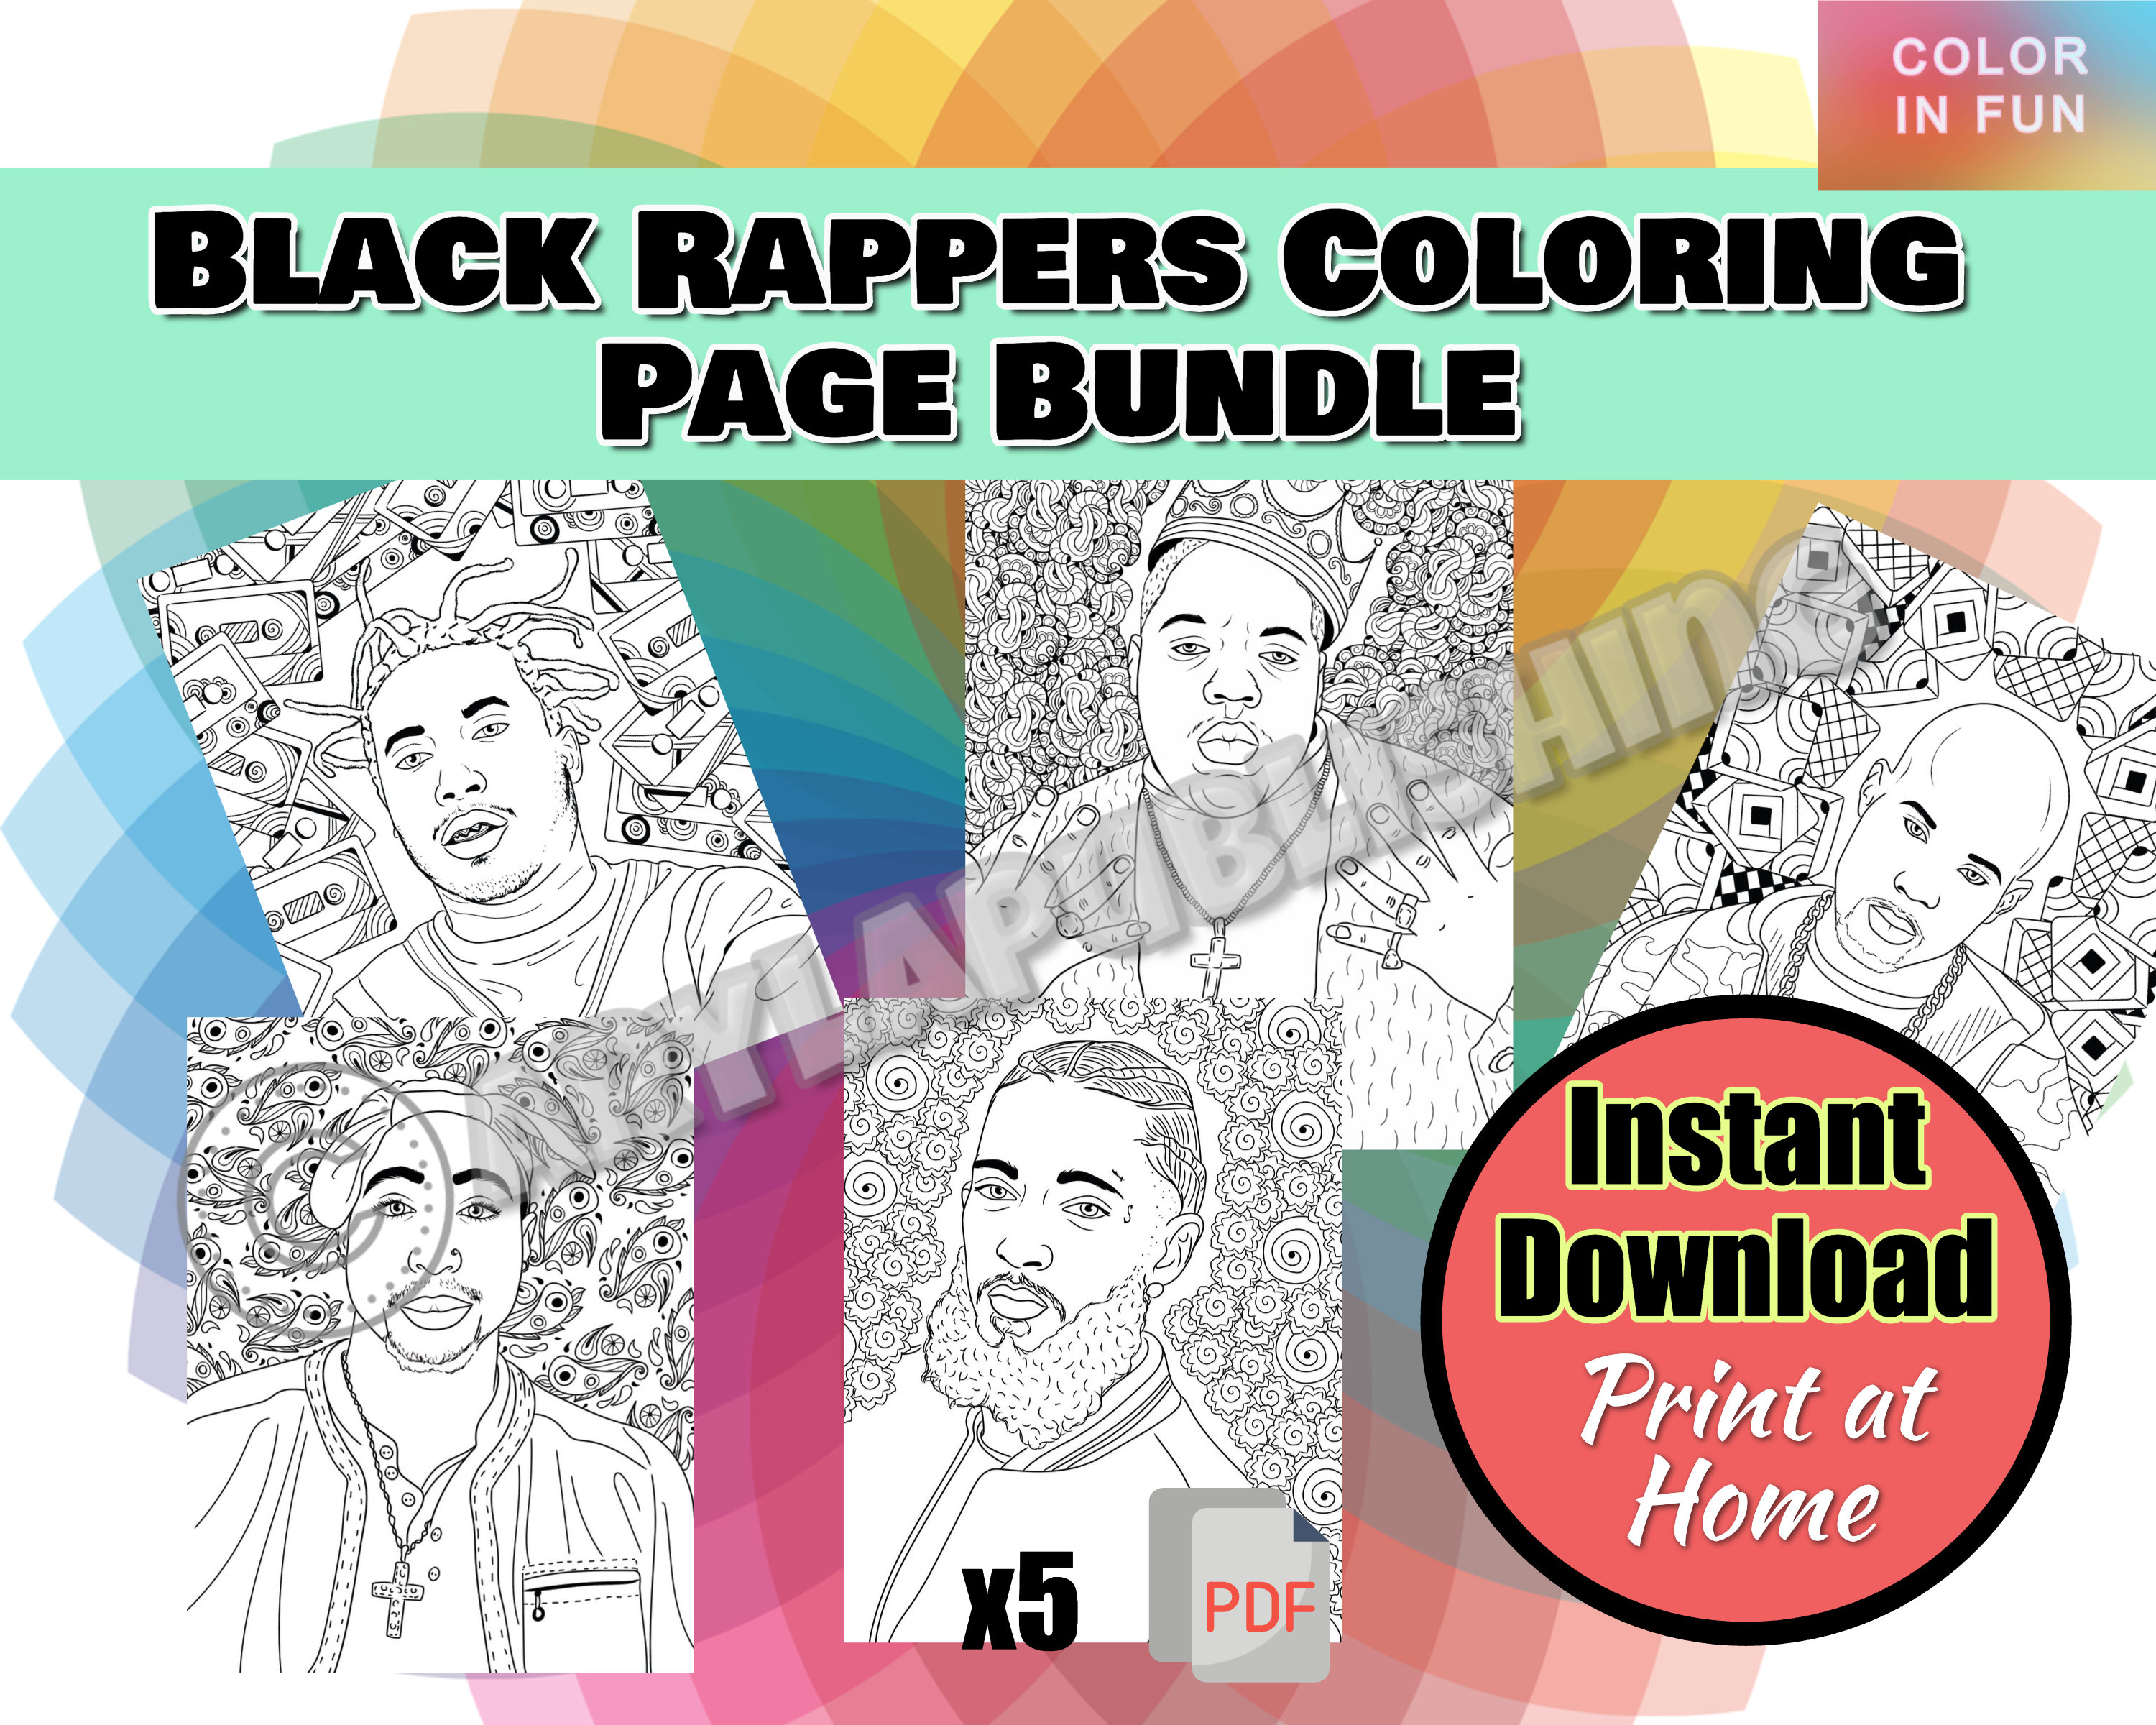 Black rappers coloring page printable colouring page adult color sheet instant download x